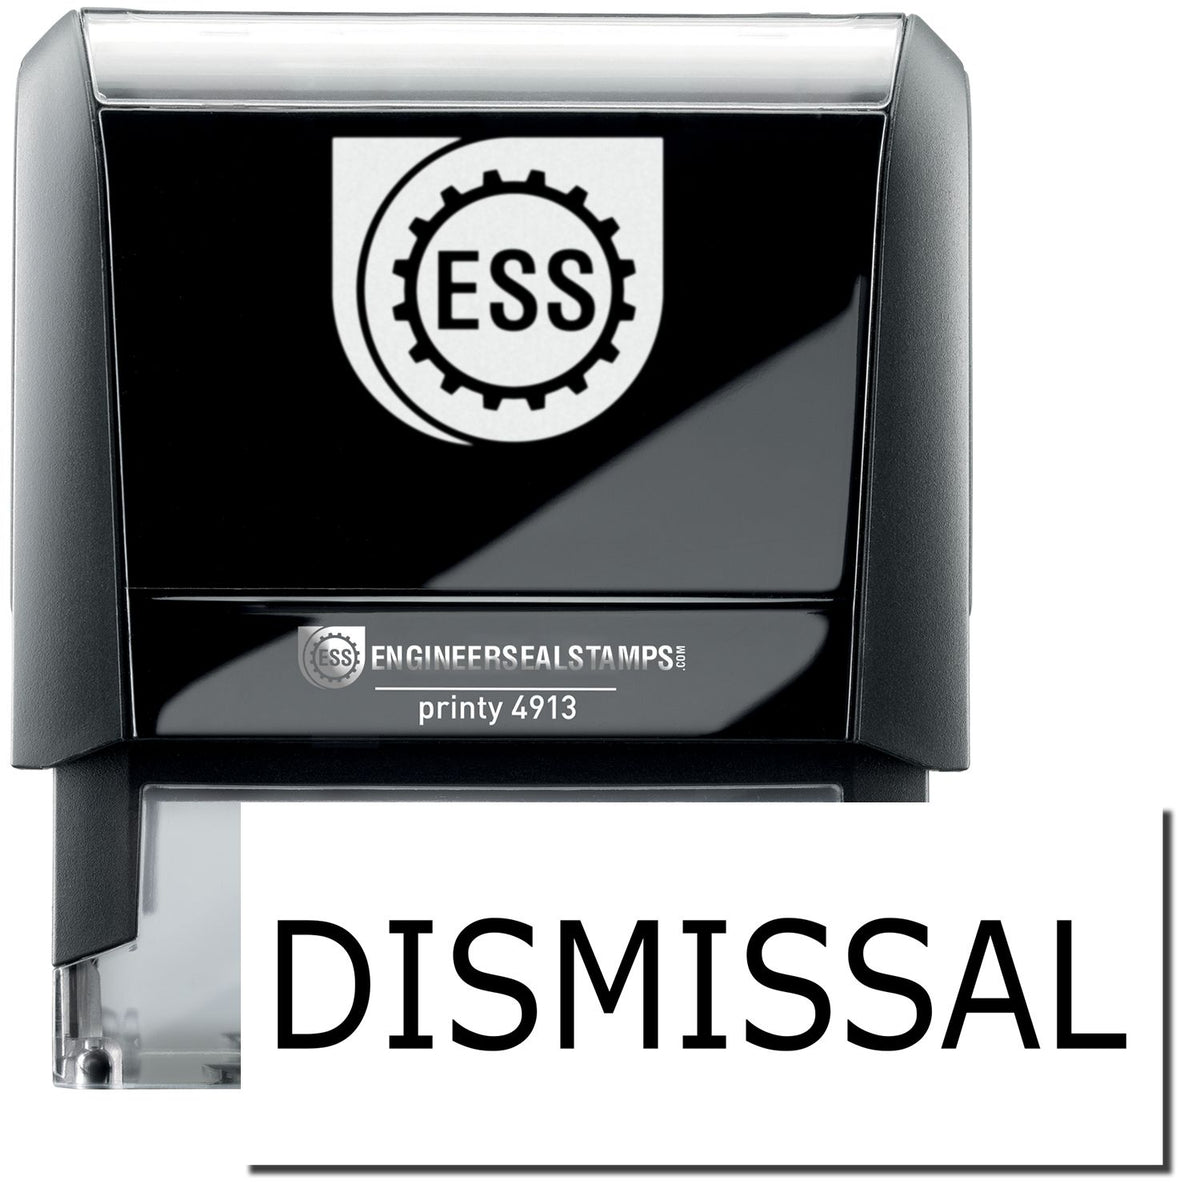 A self-inking stamp with a stamped image showing how the text &quot;DISMISSAL&quot; in a large bold font is displayed by it.